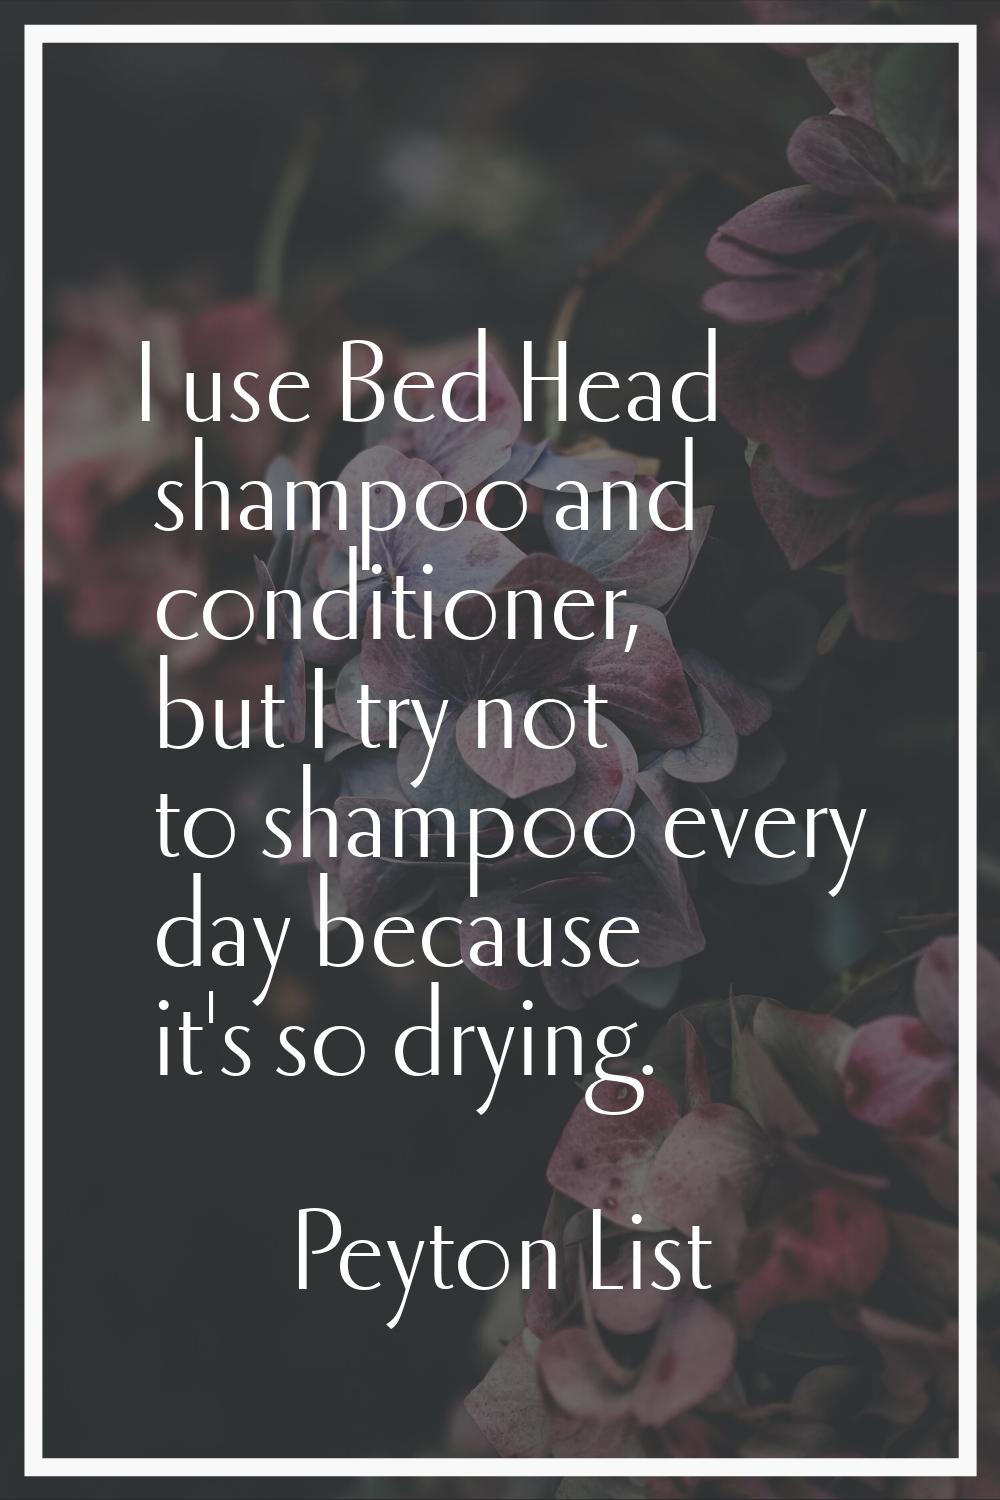 I use Bed Head shampoo and conditioner, but I try not to shampoo every day because it's so drying.